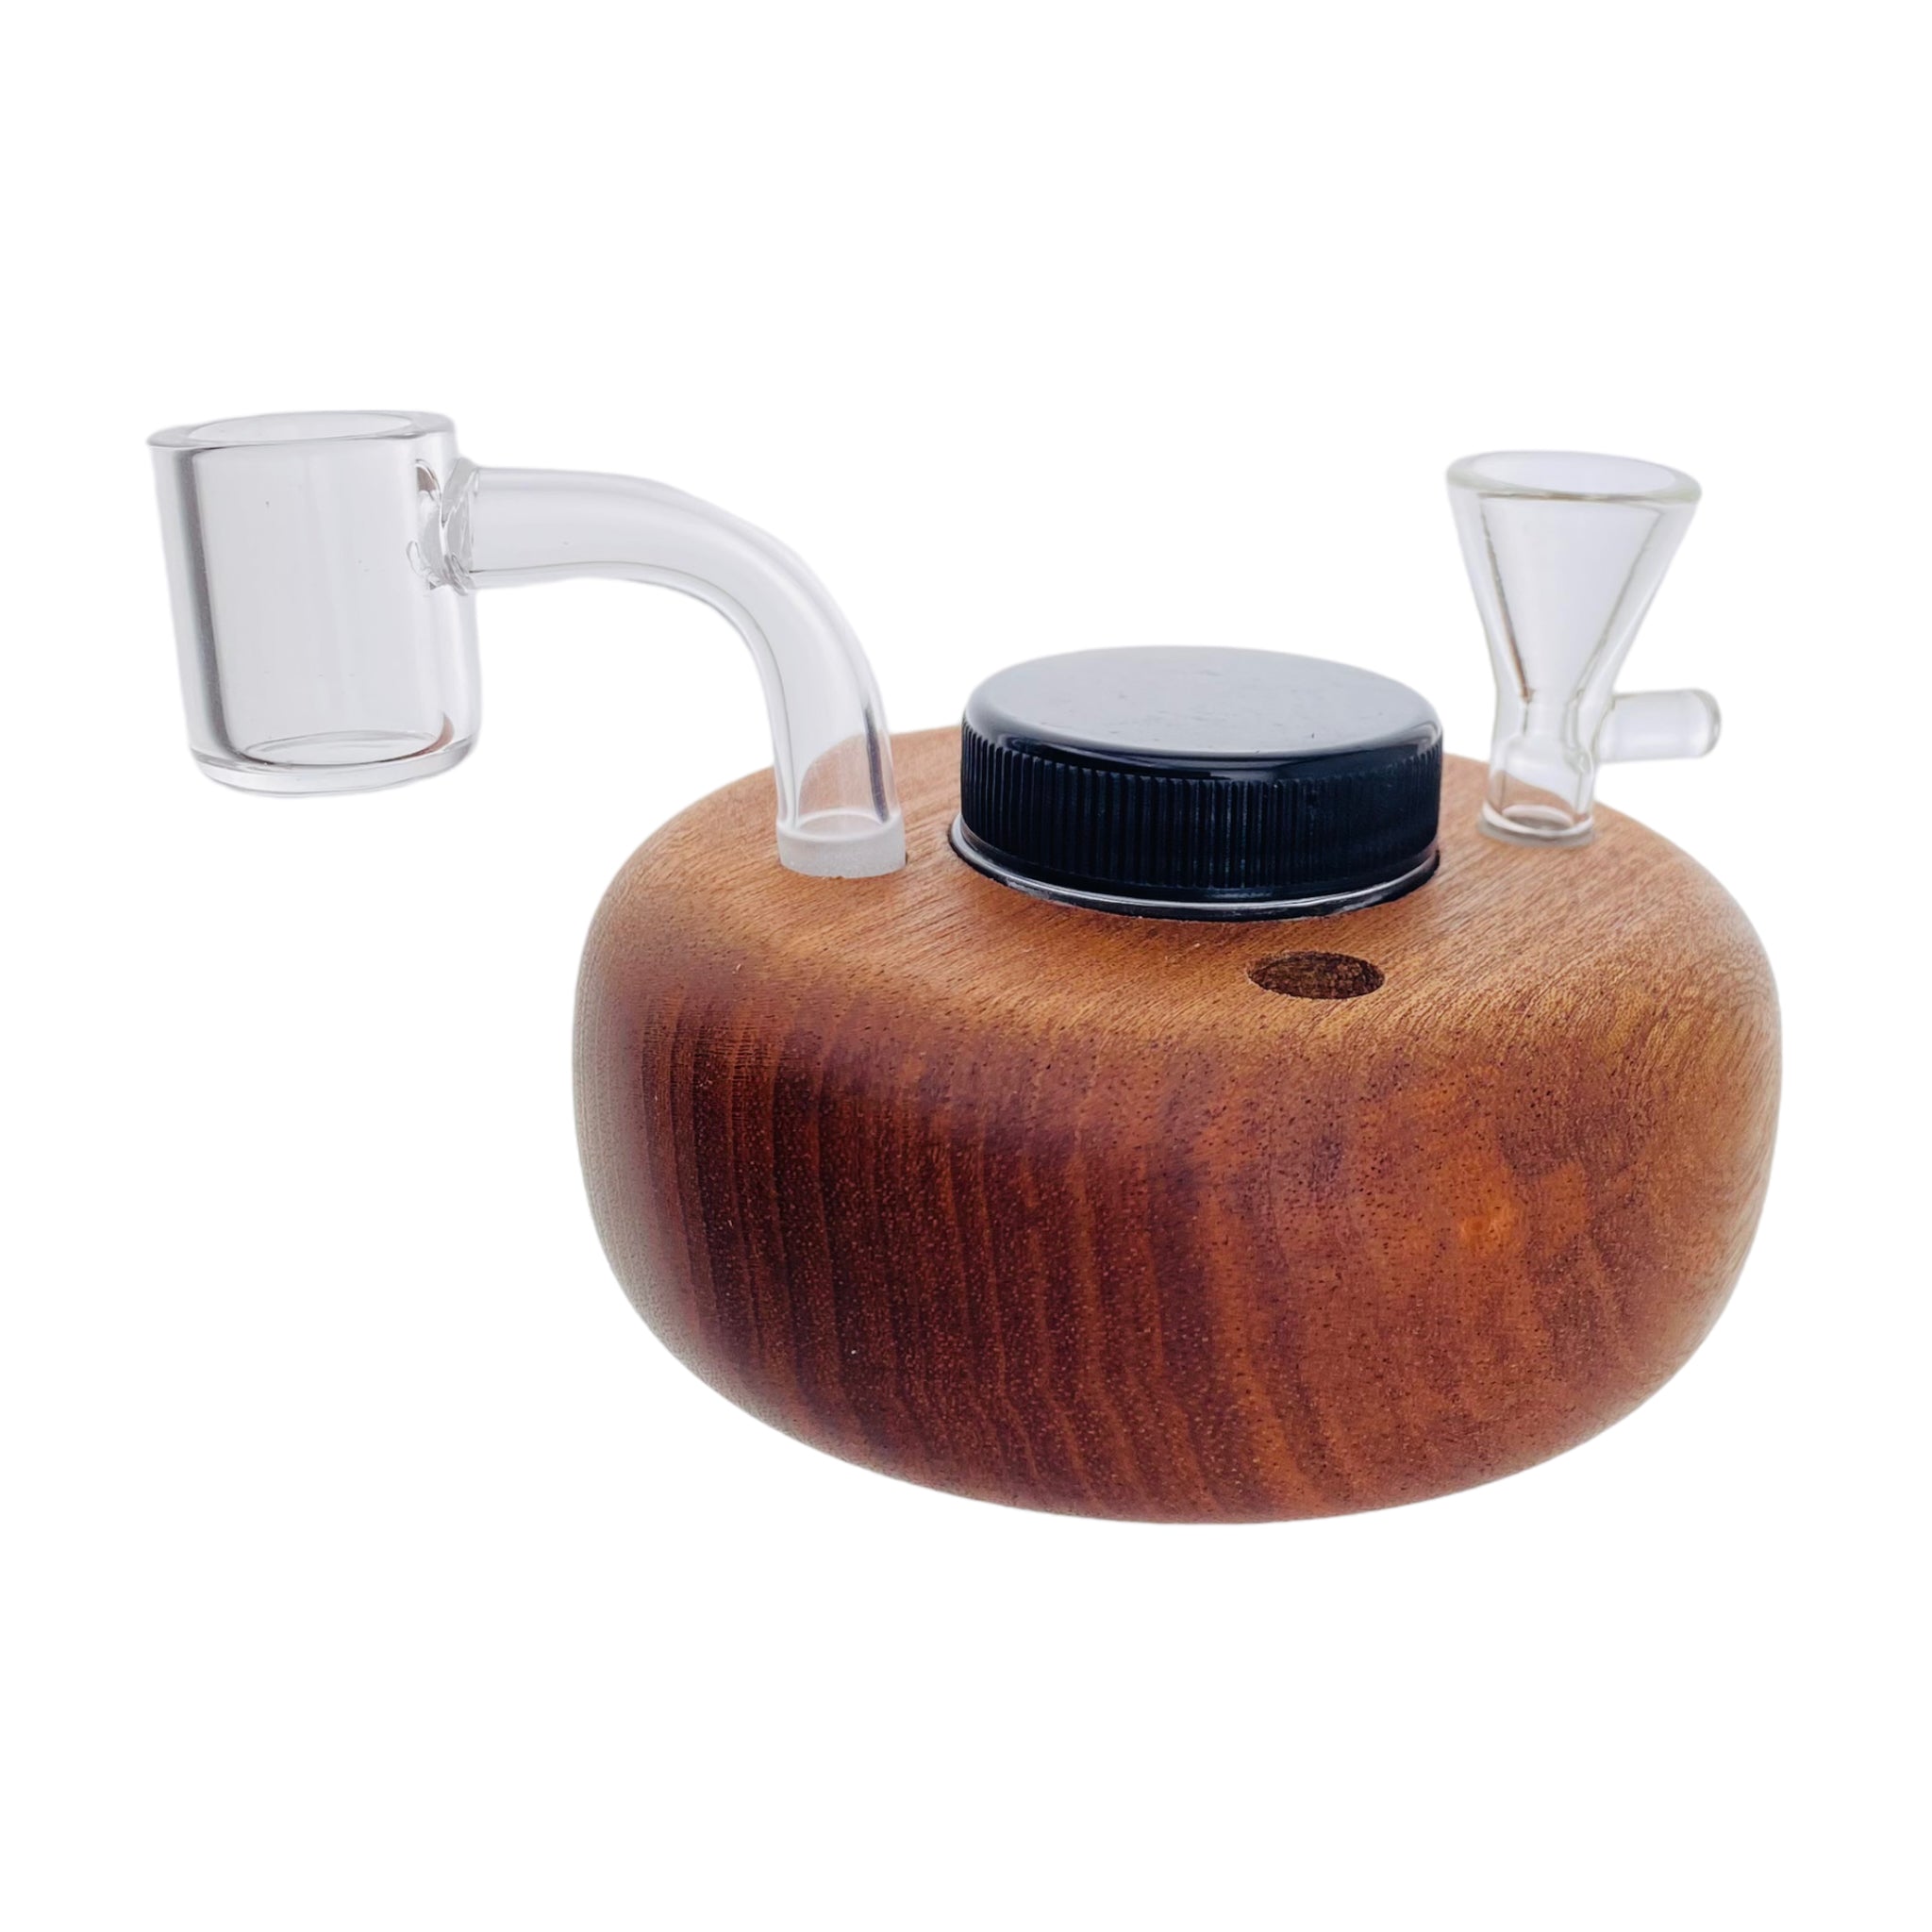 Round 4 Hole Wood Display Stand Holder For 10mm Bong Bowl Pieces Or Quartz Bangers - Mahogany Puck